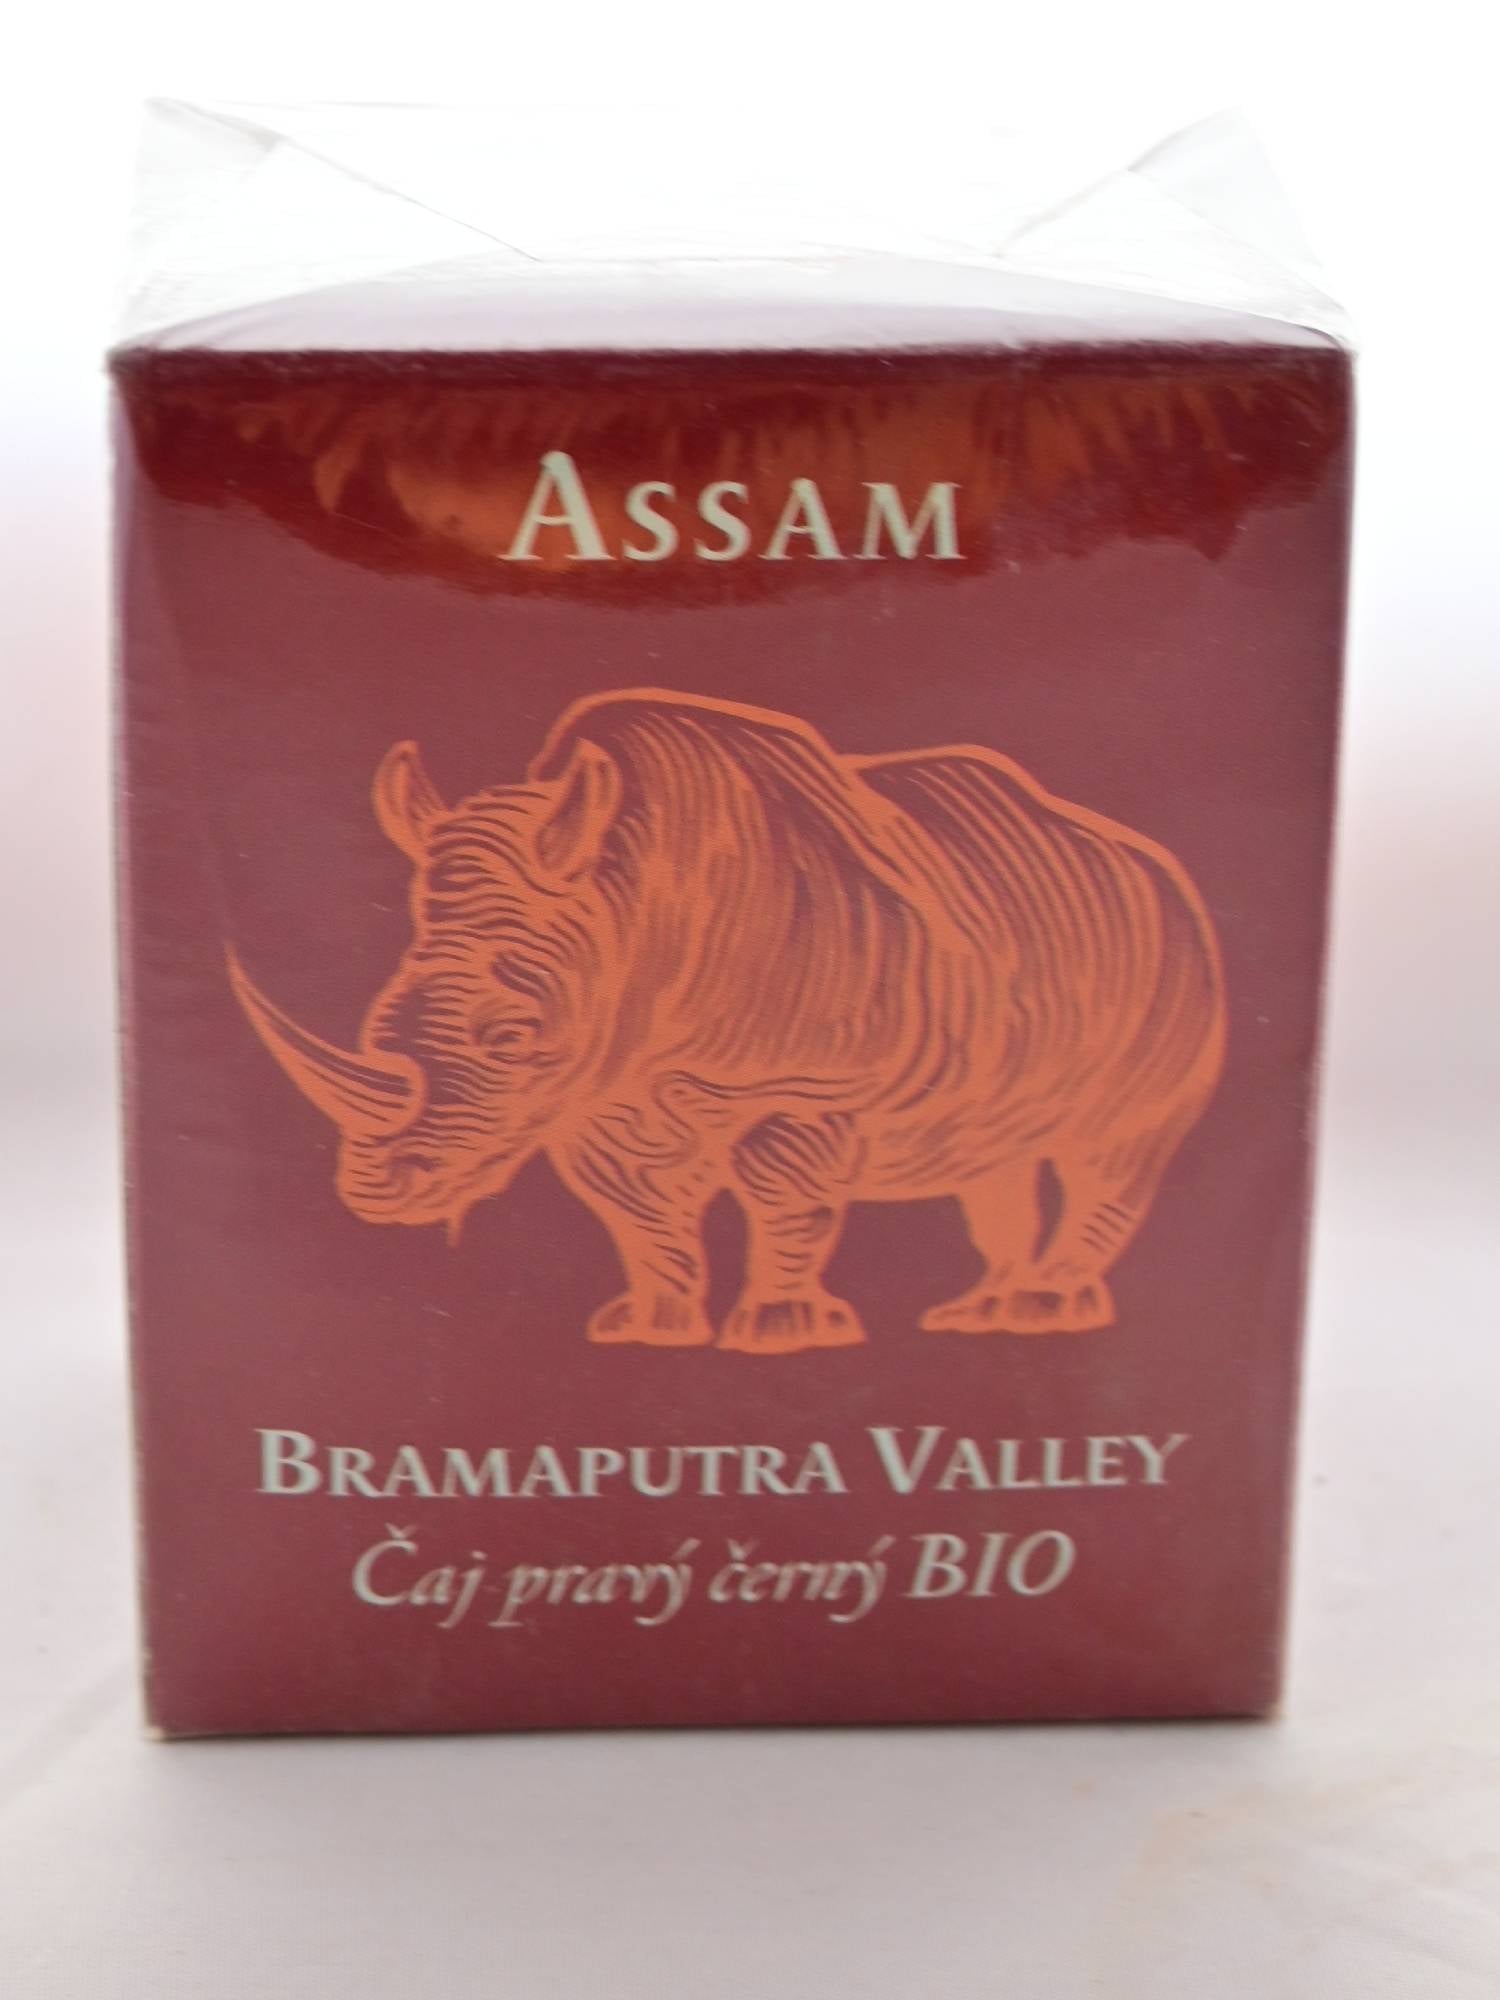 The Assam Brahmaputra box is a squat, red cube with an orange rhino on the front. White text reads: "Assam. Brahmaputra Valley." Czech lettering is below the English writing.